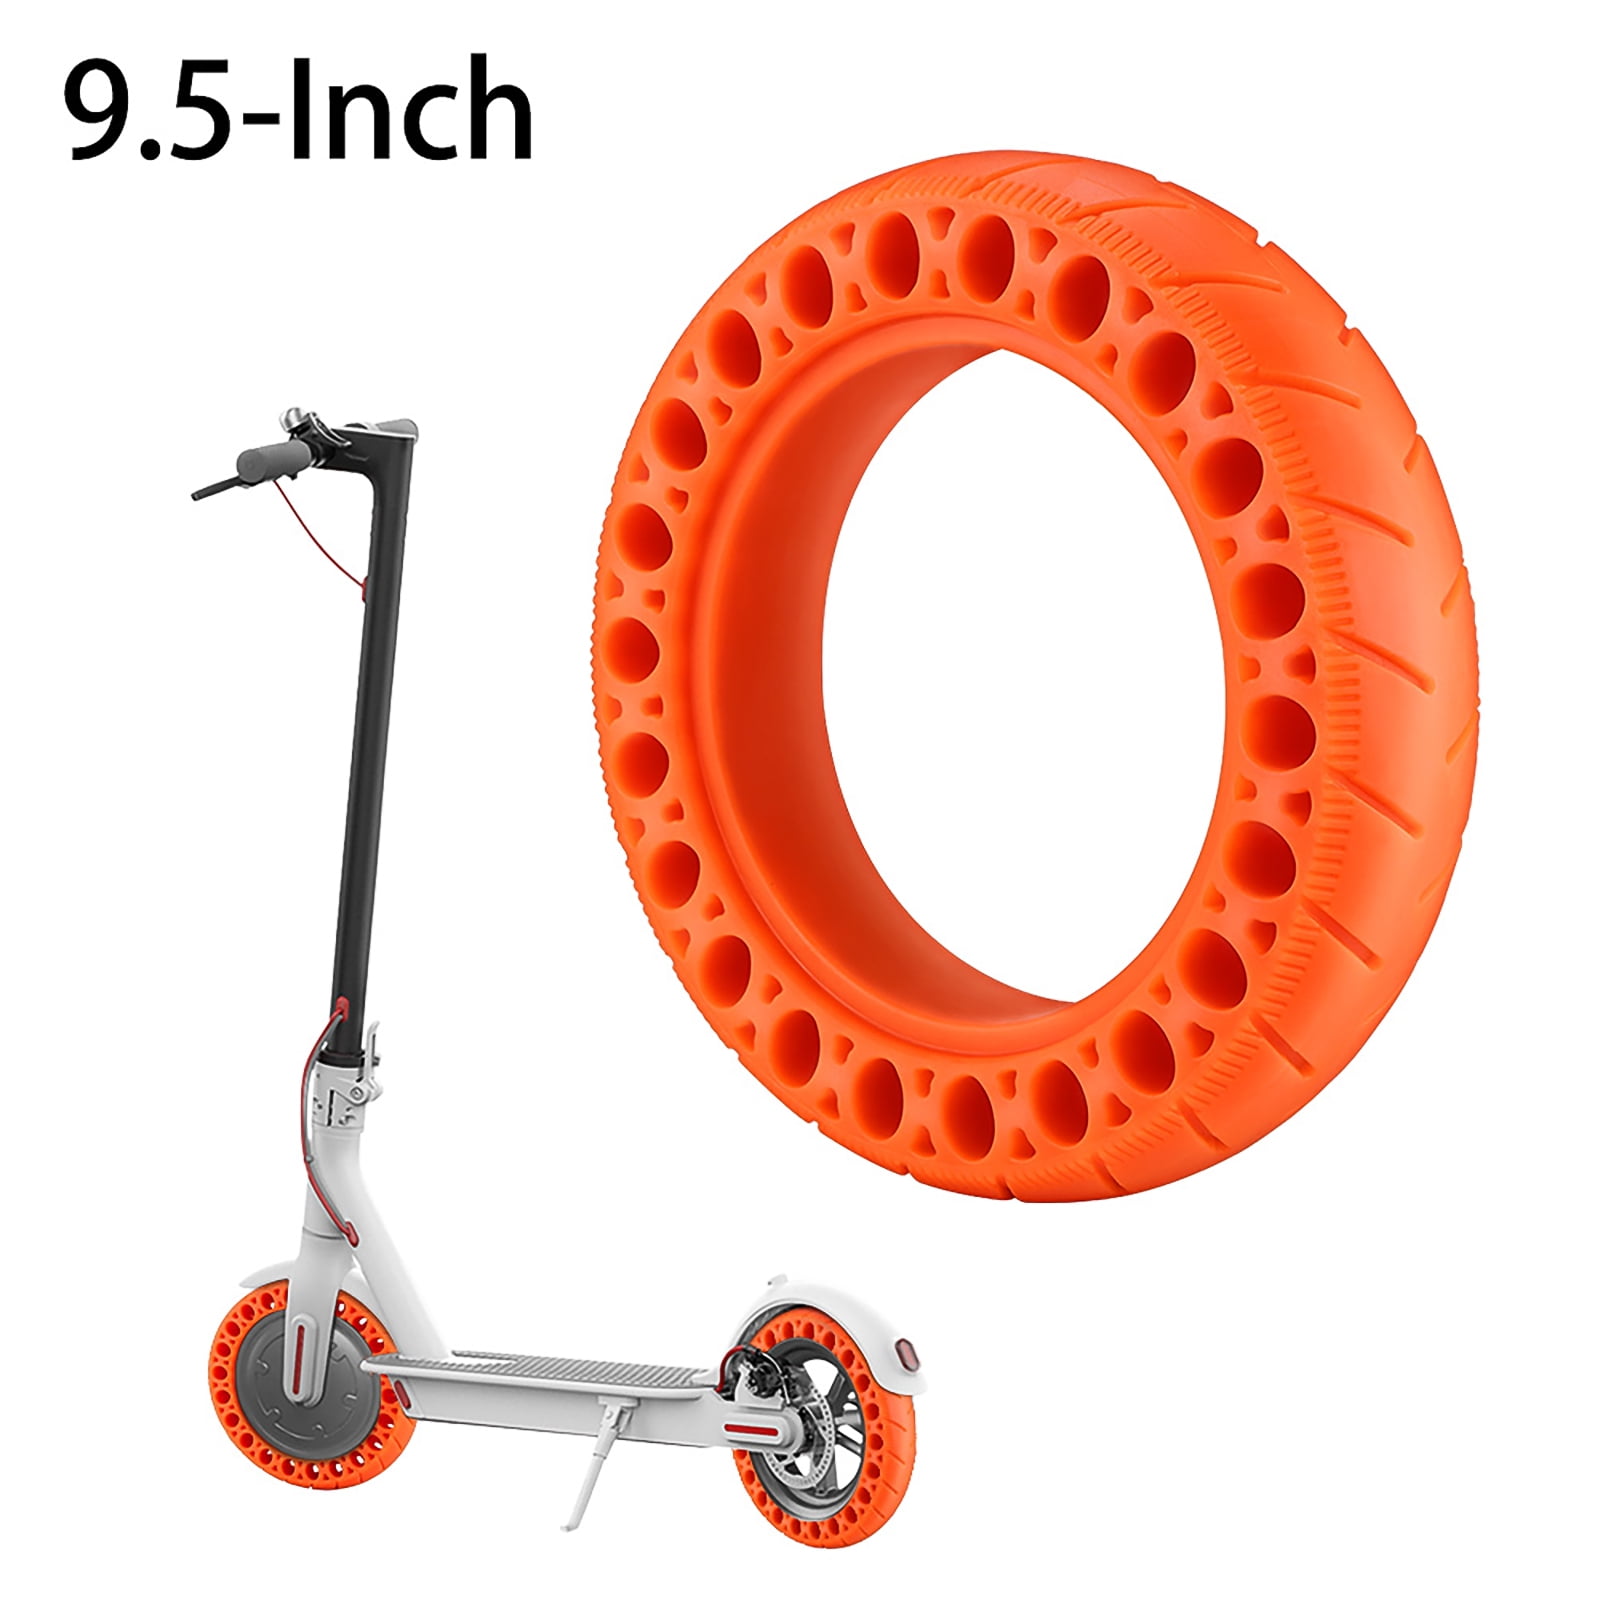 Solid Tire Replacement for Electric Scooter XIAOMI Mi M365 Gotrax GXL V2 8.5 for sale online 